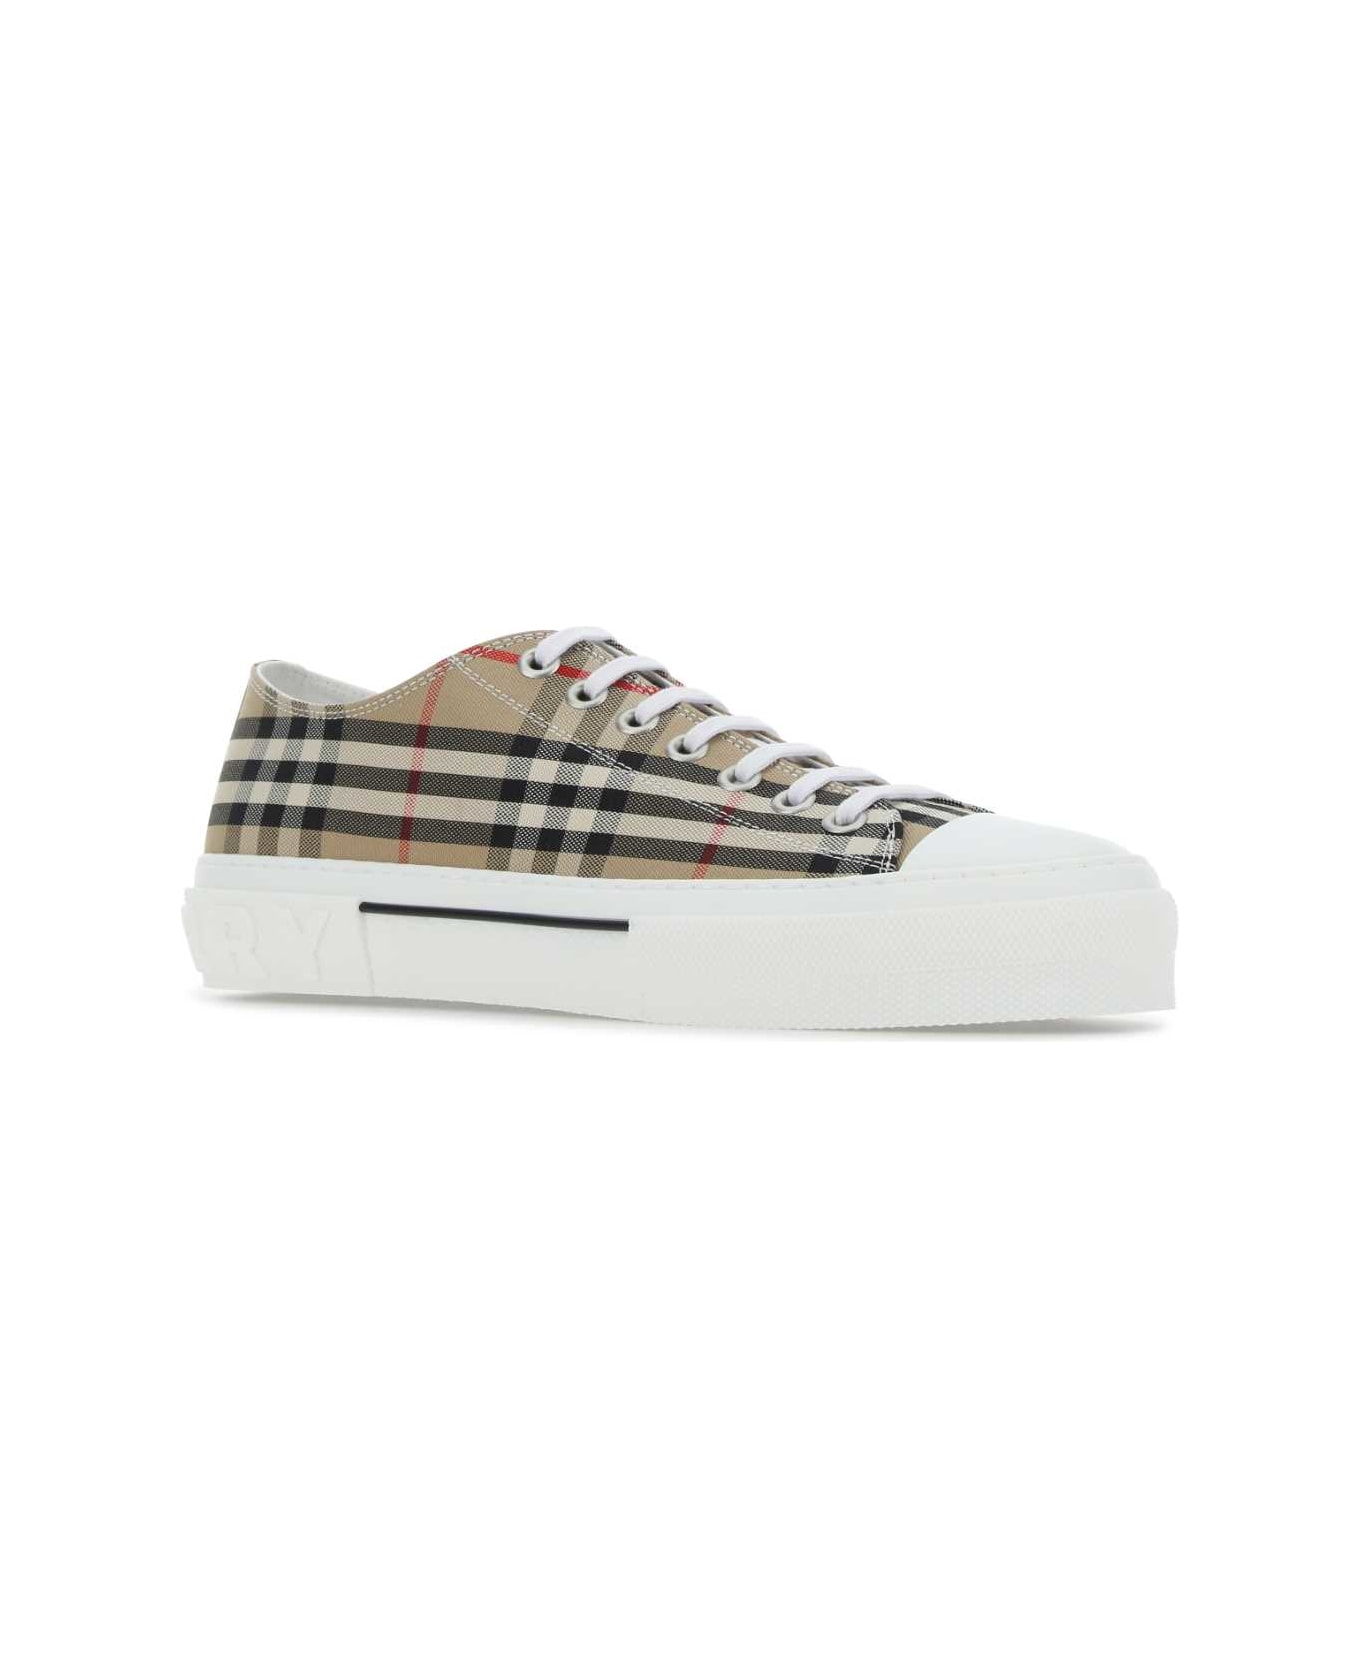 Burberry Embroidered Canvas Sneakers - A7028